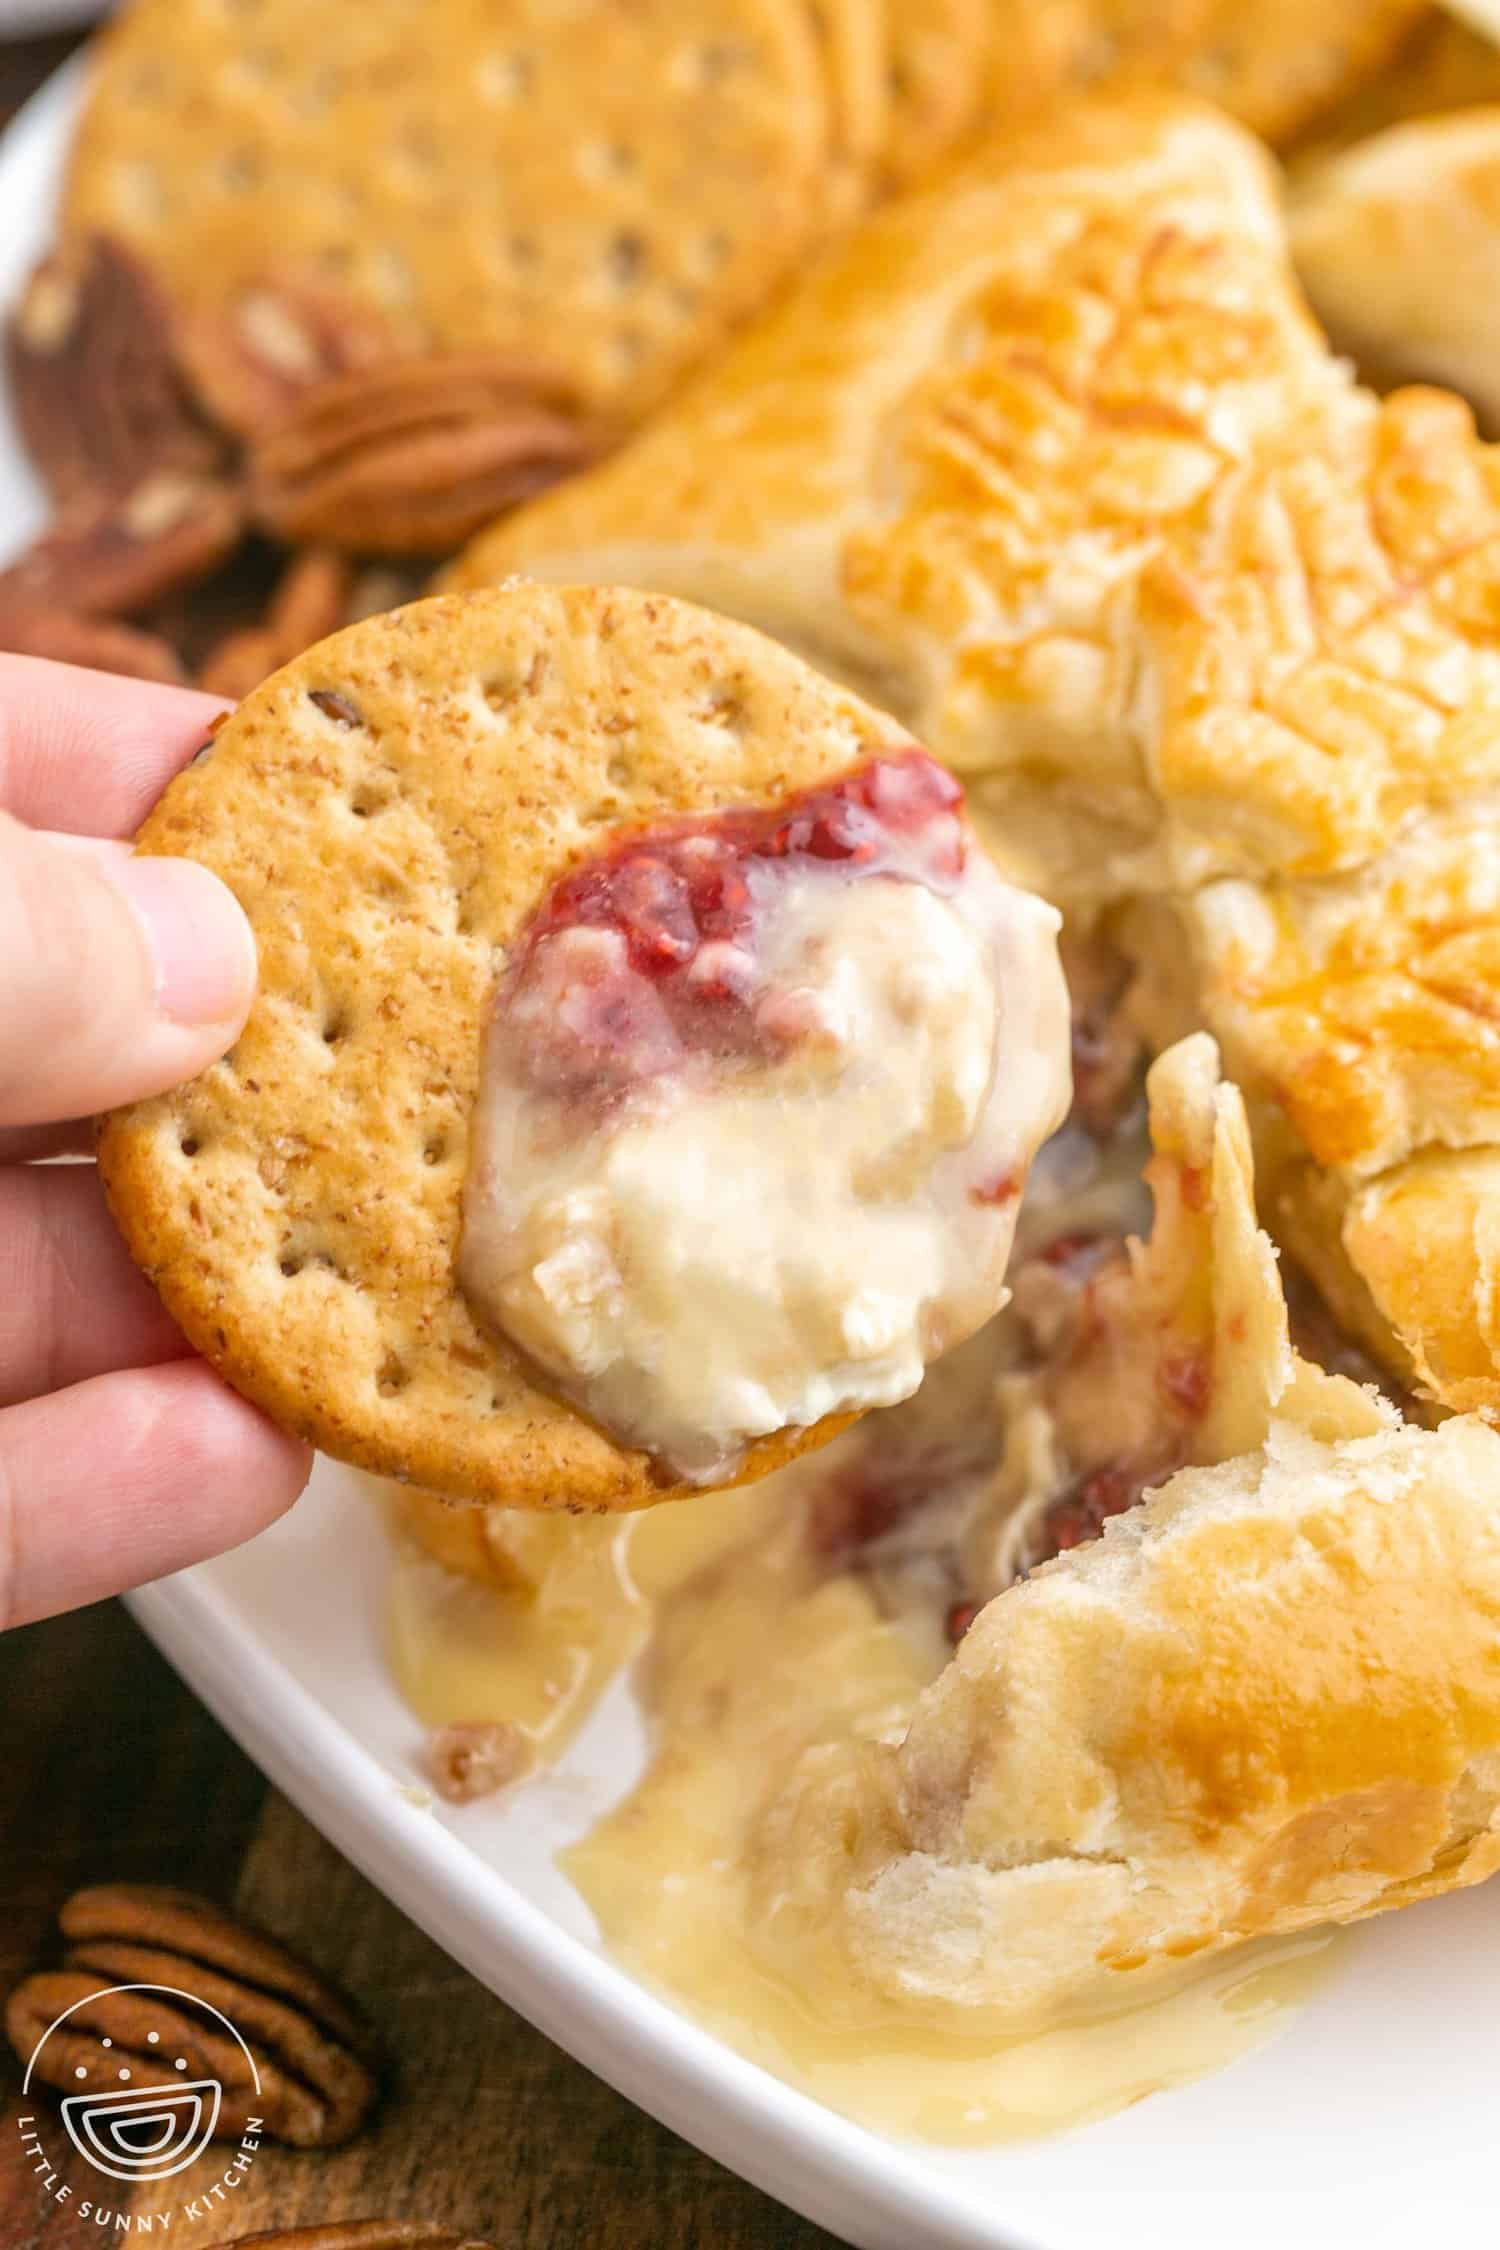 Melty brie cheese on a cracker with raspberry jam